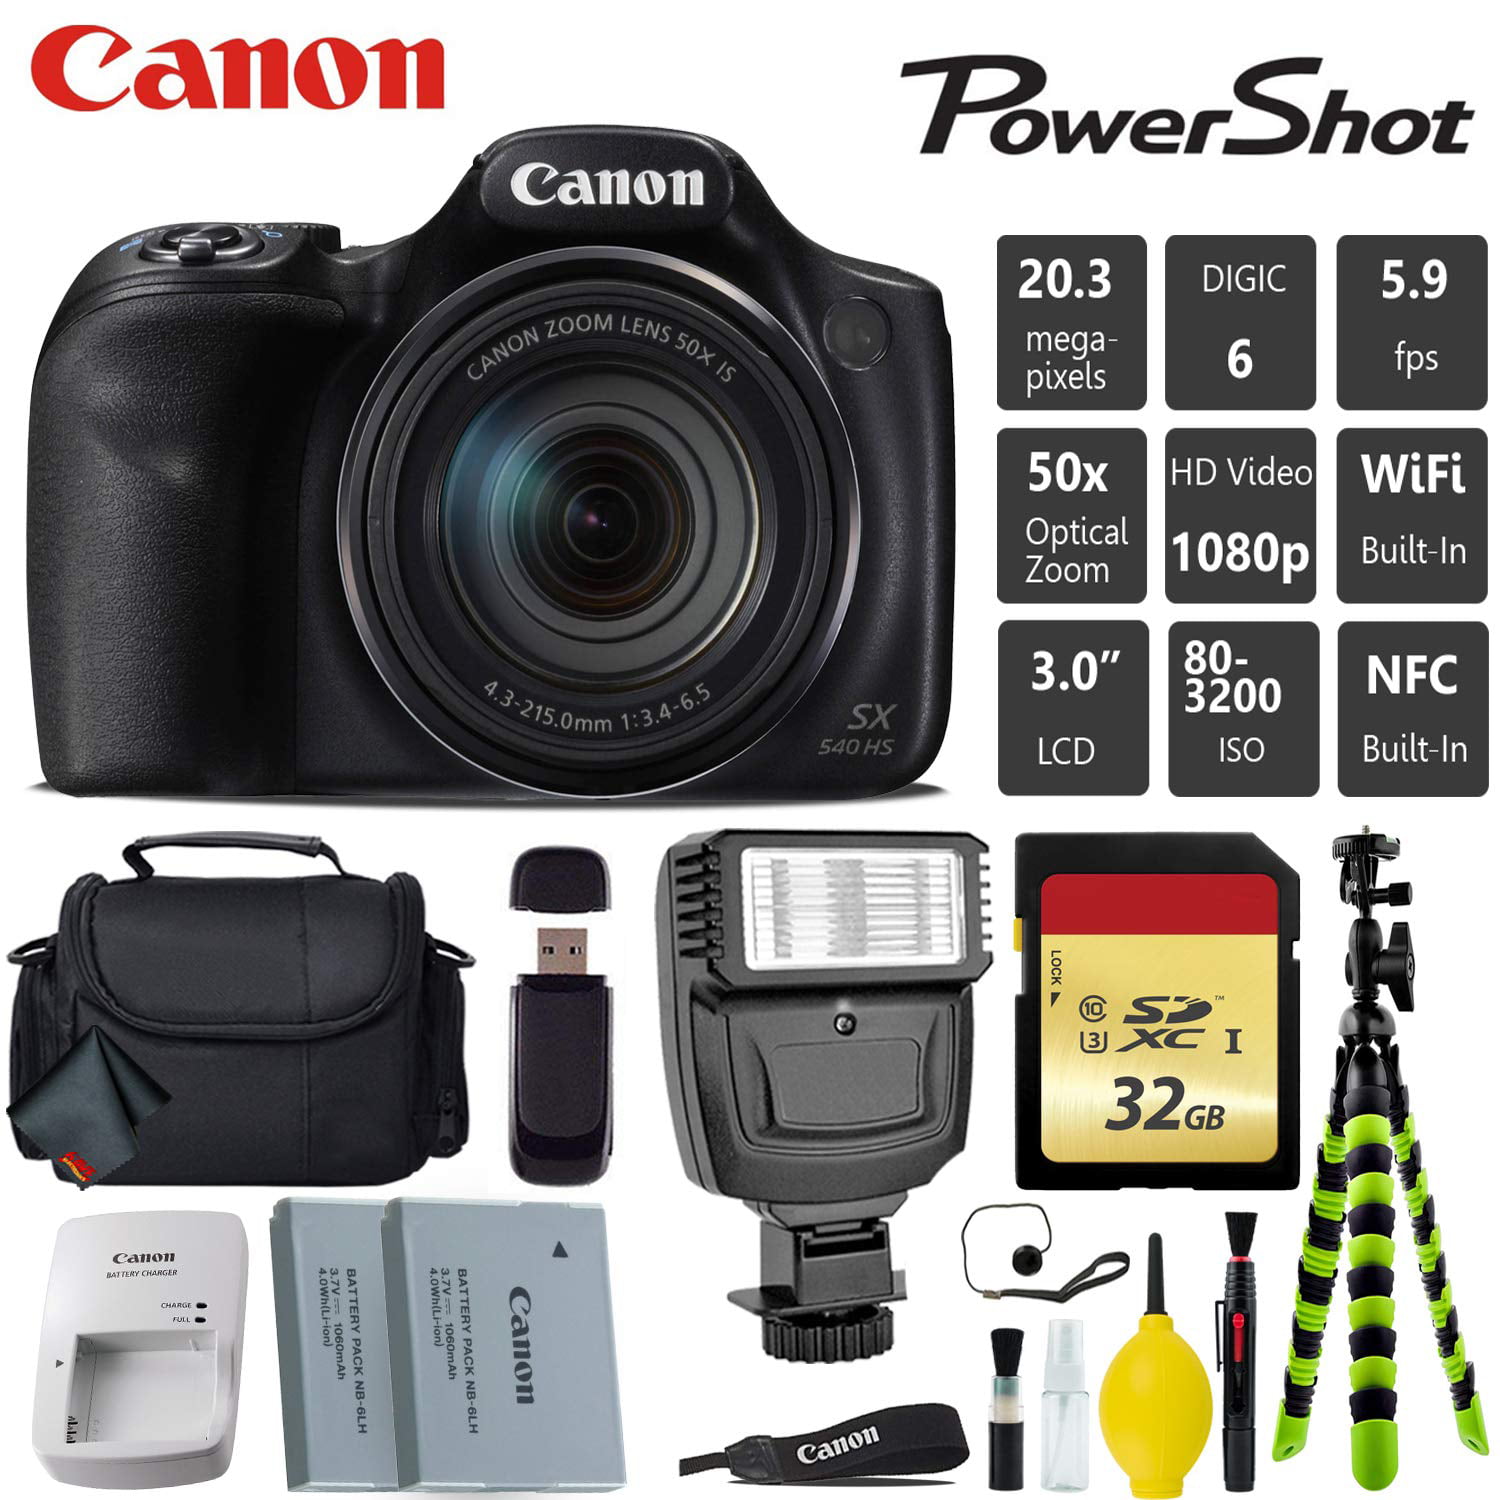 Canon HS Digital Point and Shoot 20MP Camera + Extra Battery + Digital Flash + Camera Case + 32GB Class 10 Memory Card - Intl Model - image 1 of 6